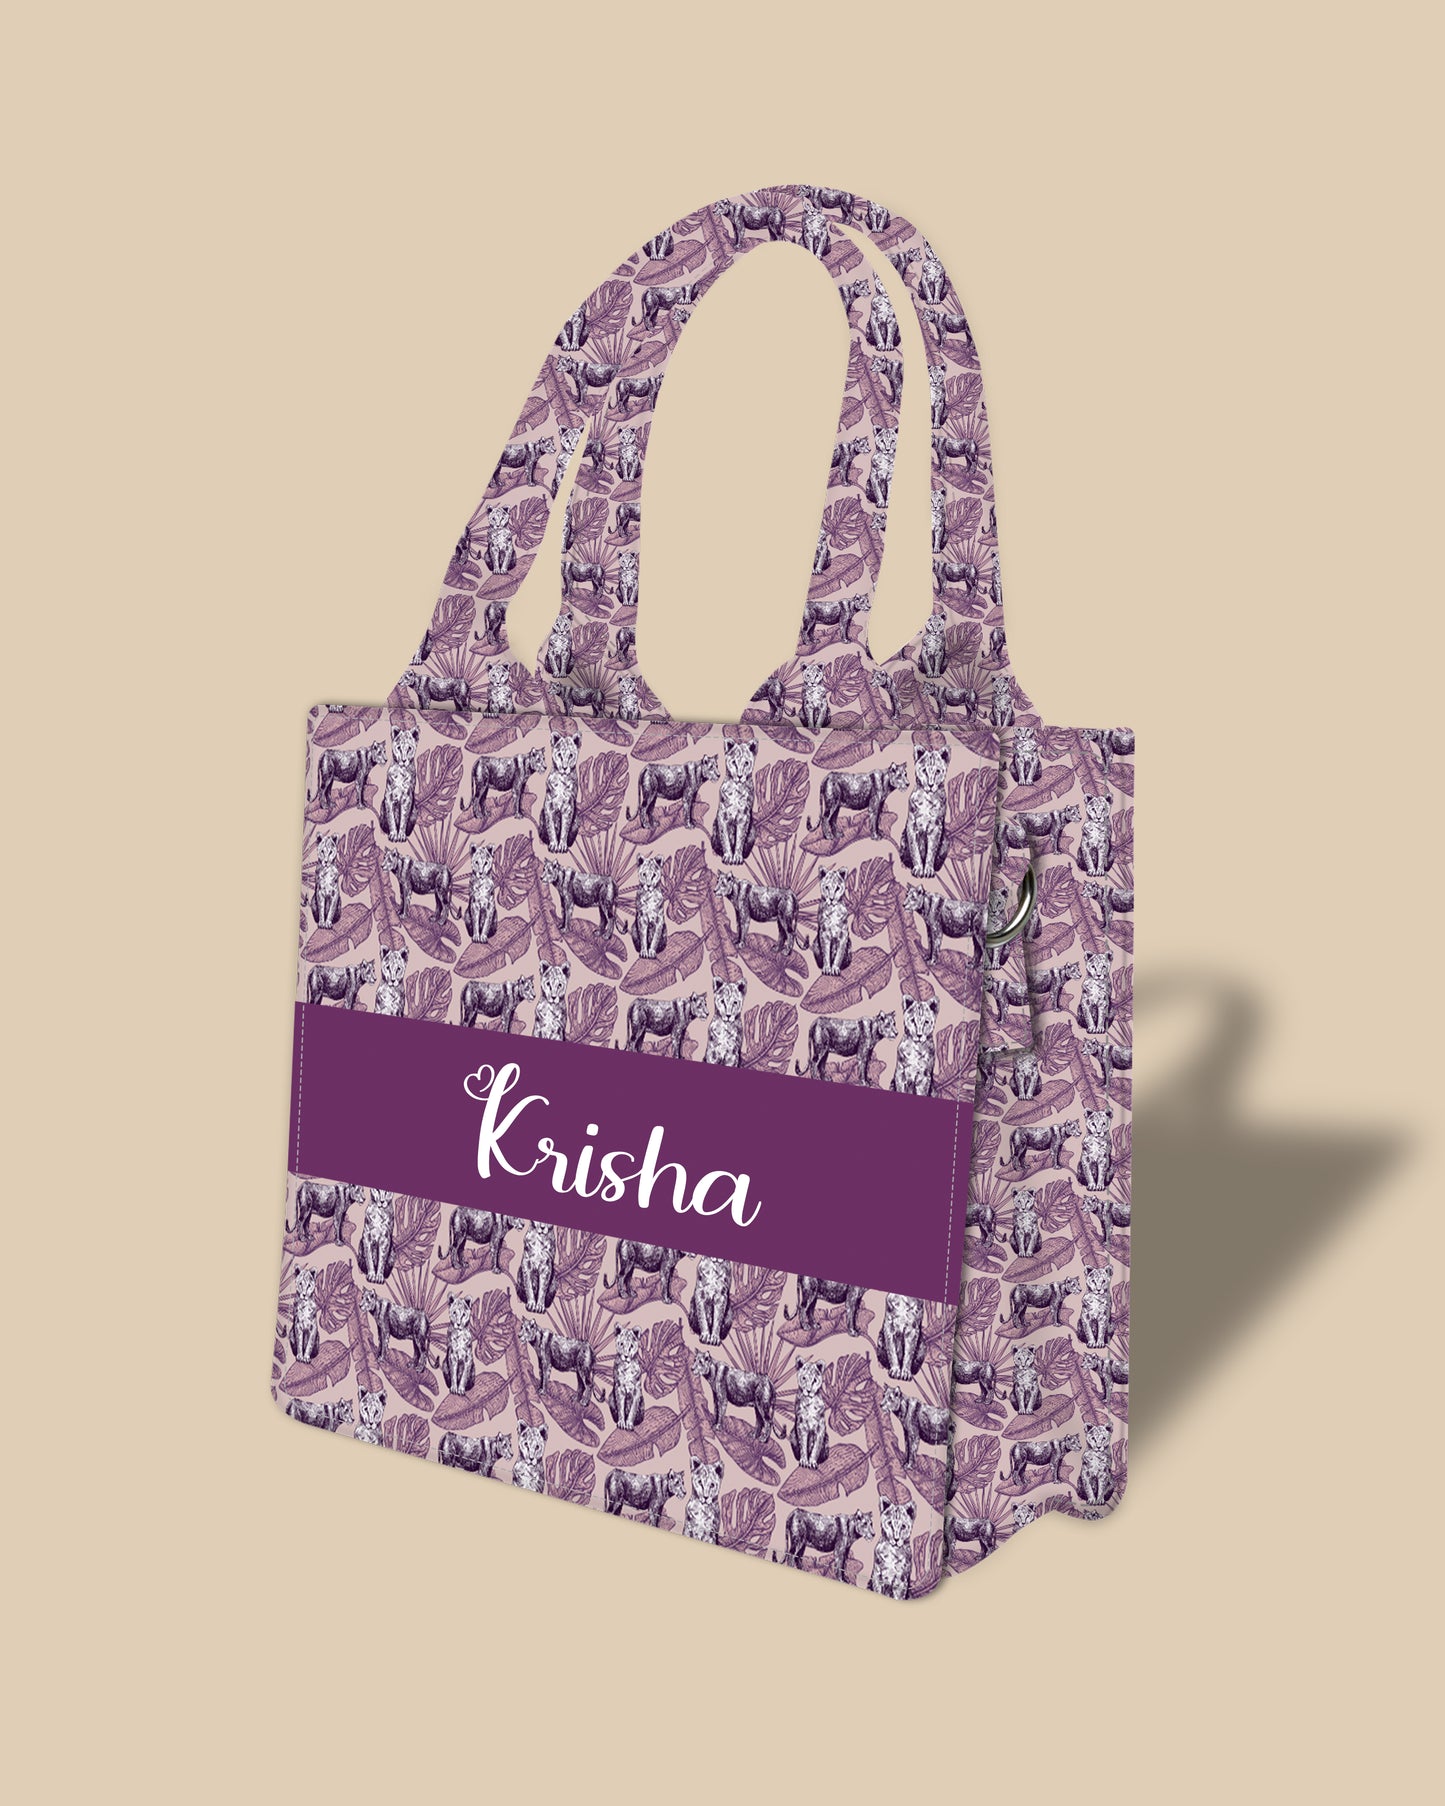 Customized Small Tote Bag Designed With Lion And Leaves In Engraving Style